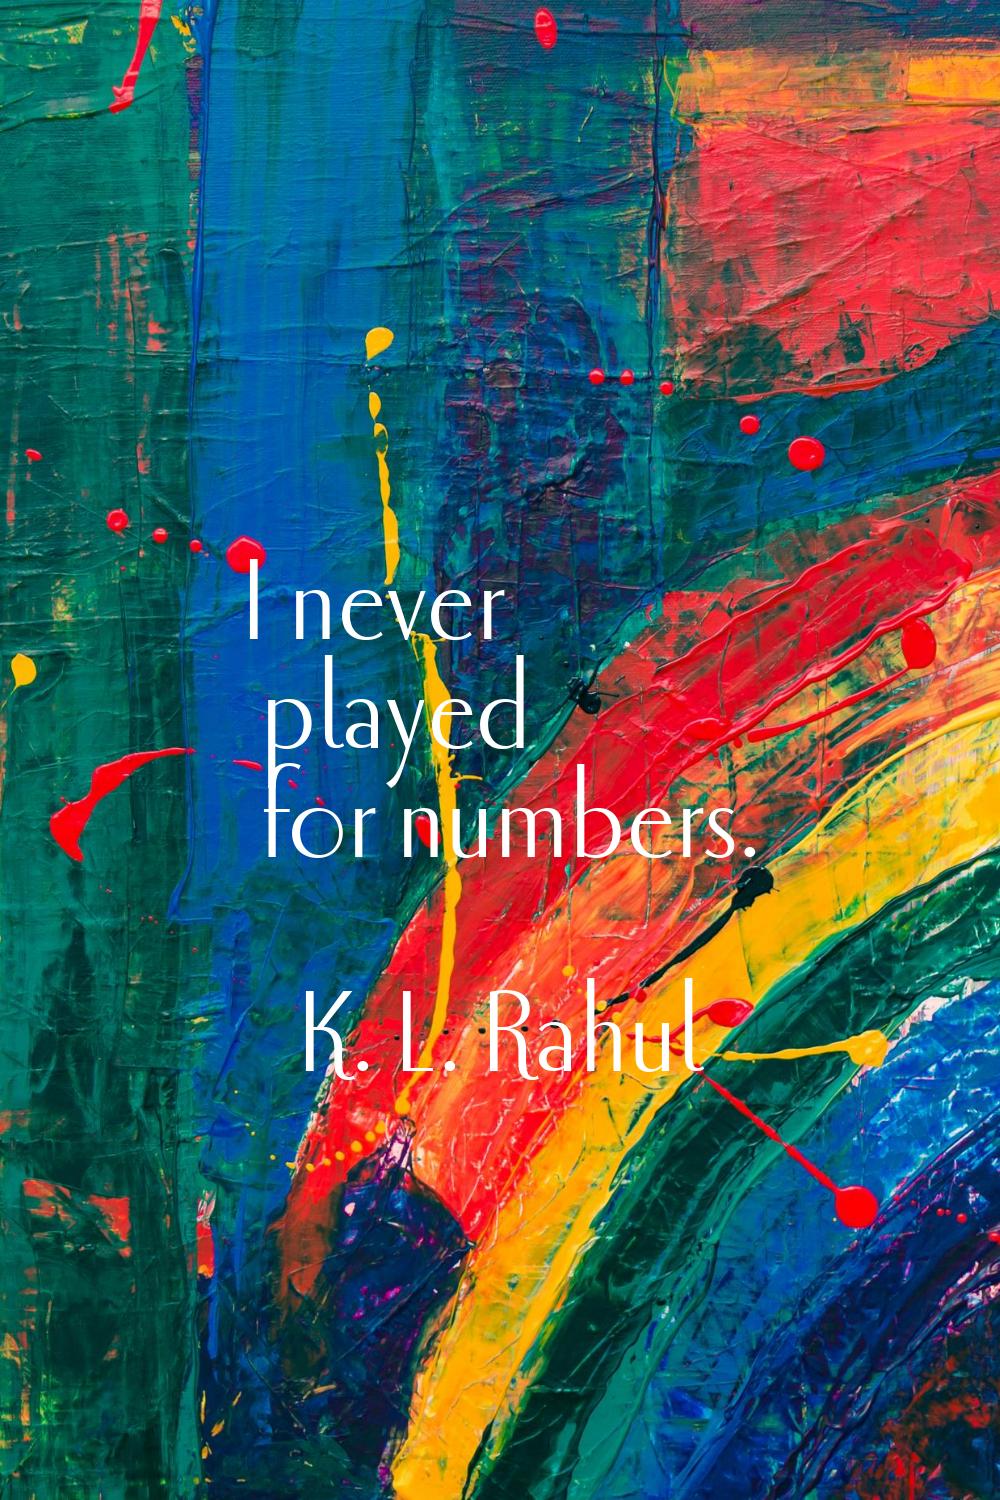 I never played for numbers.